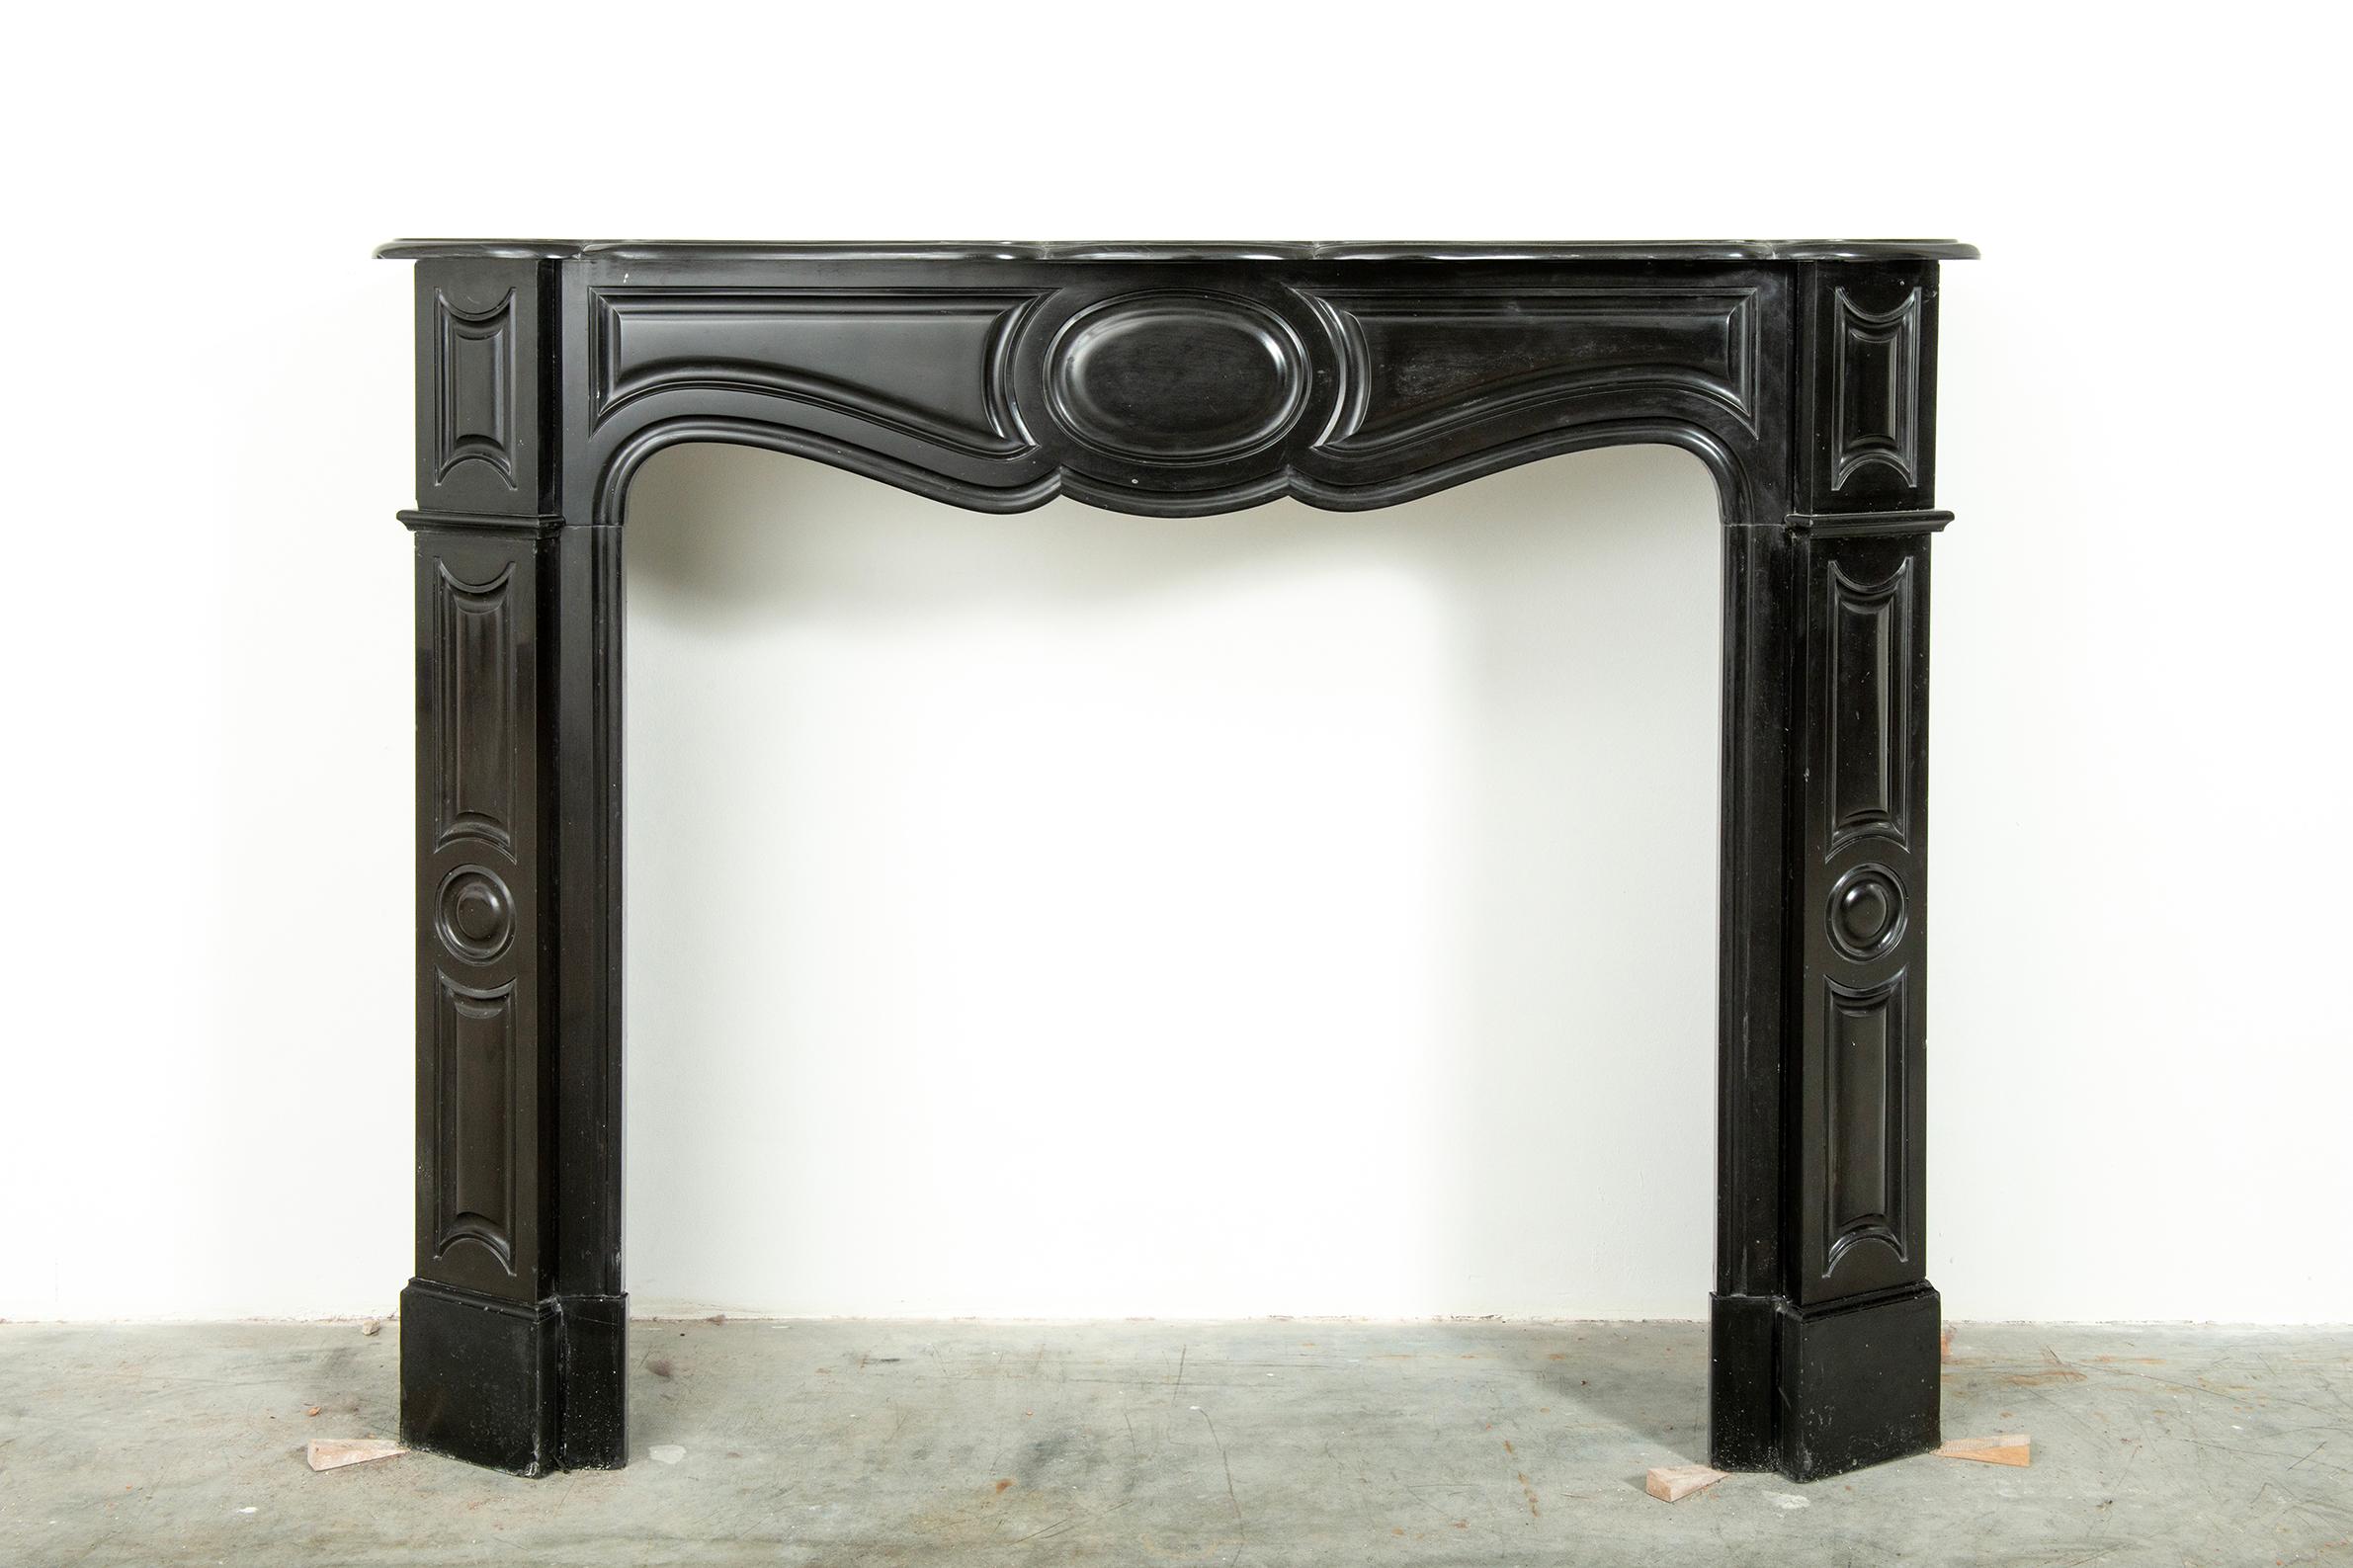 Antique French fireplace in deep black Belgian marble

Lovely petite Louis XV style fireplace great deep black coloring and friendly decorations.

Nice sculpted shelf above a paneled freeze with a central circle between two paneled enblocks above